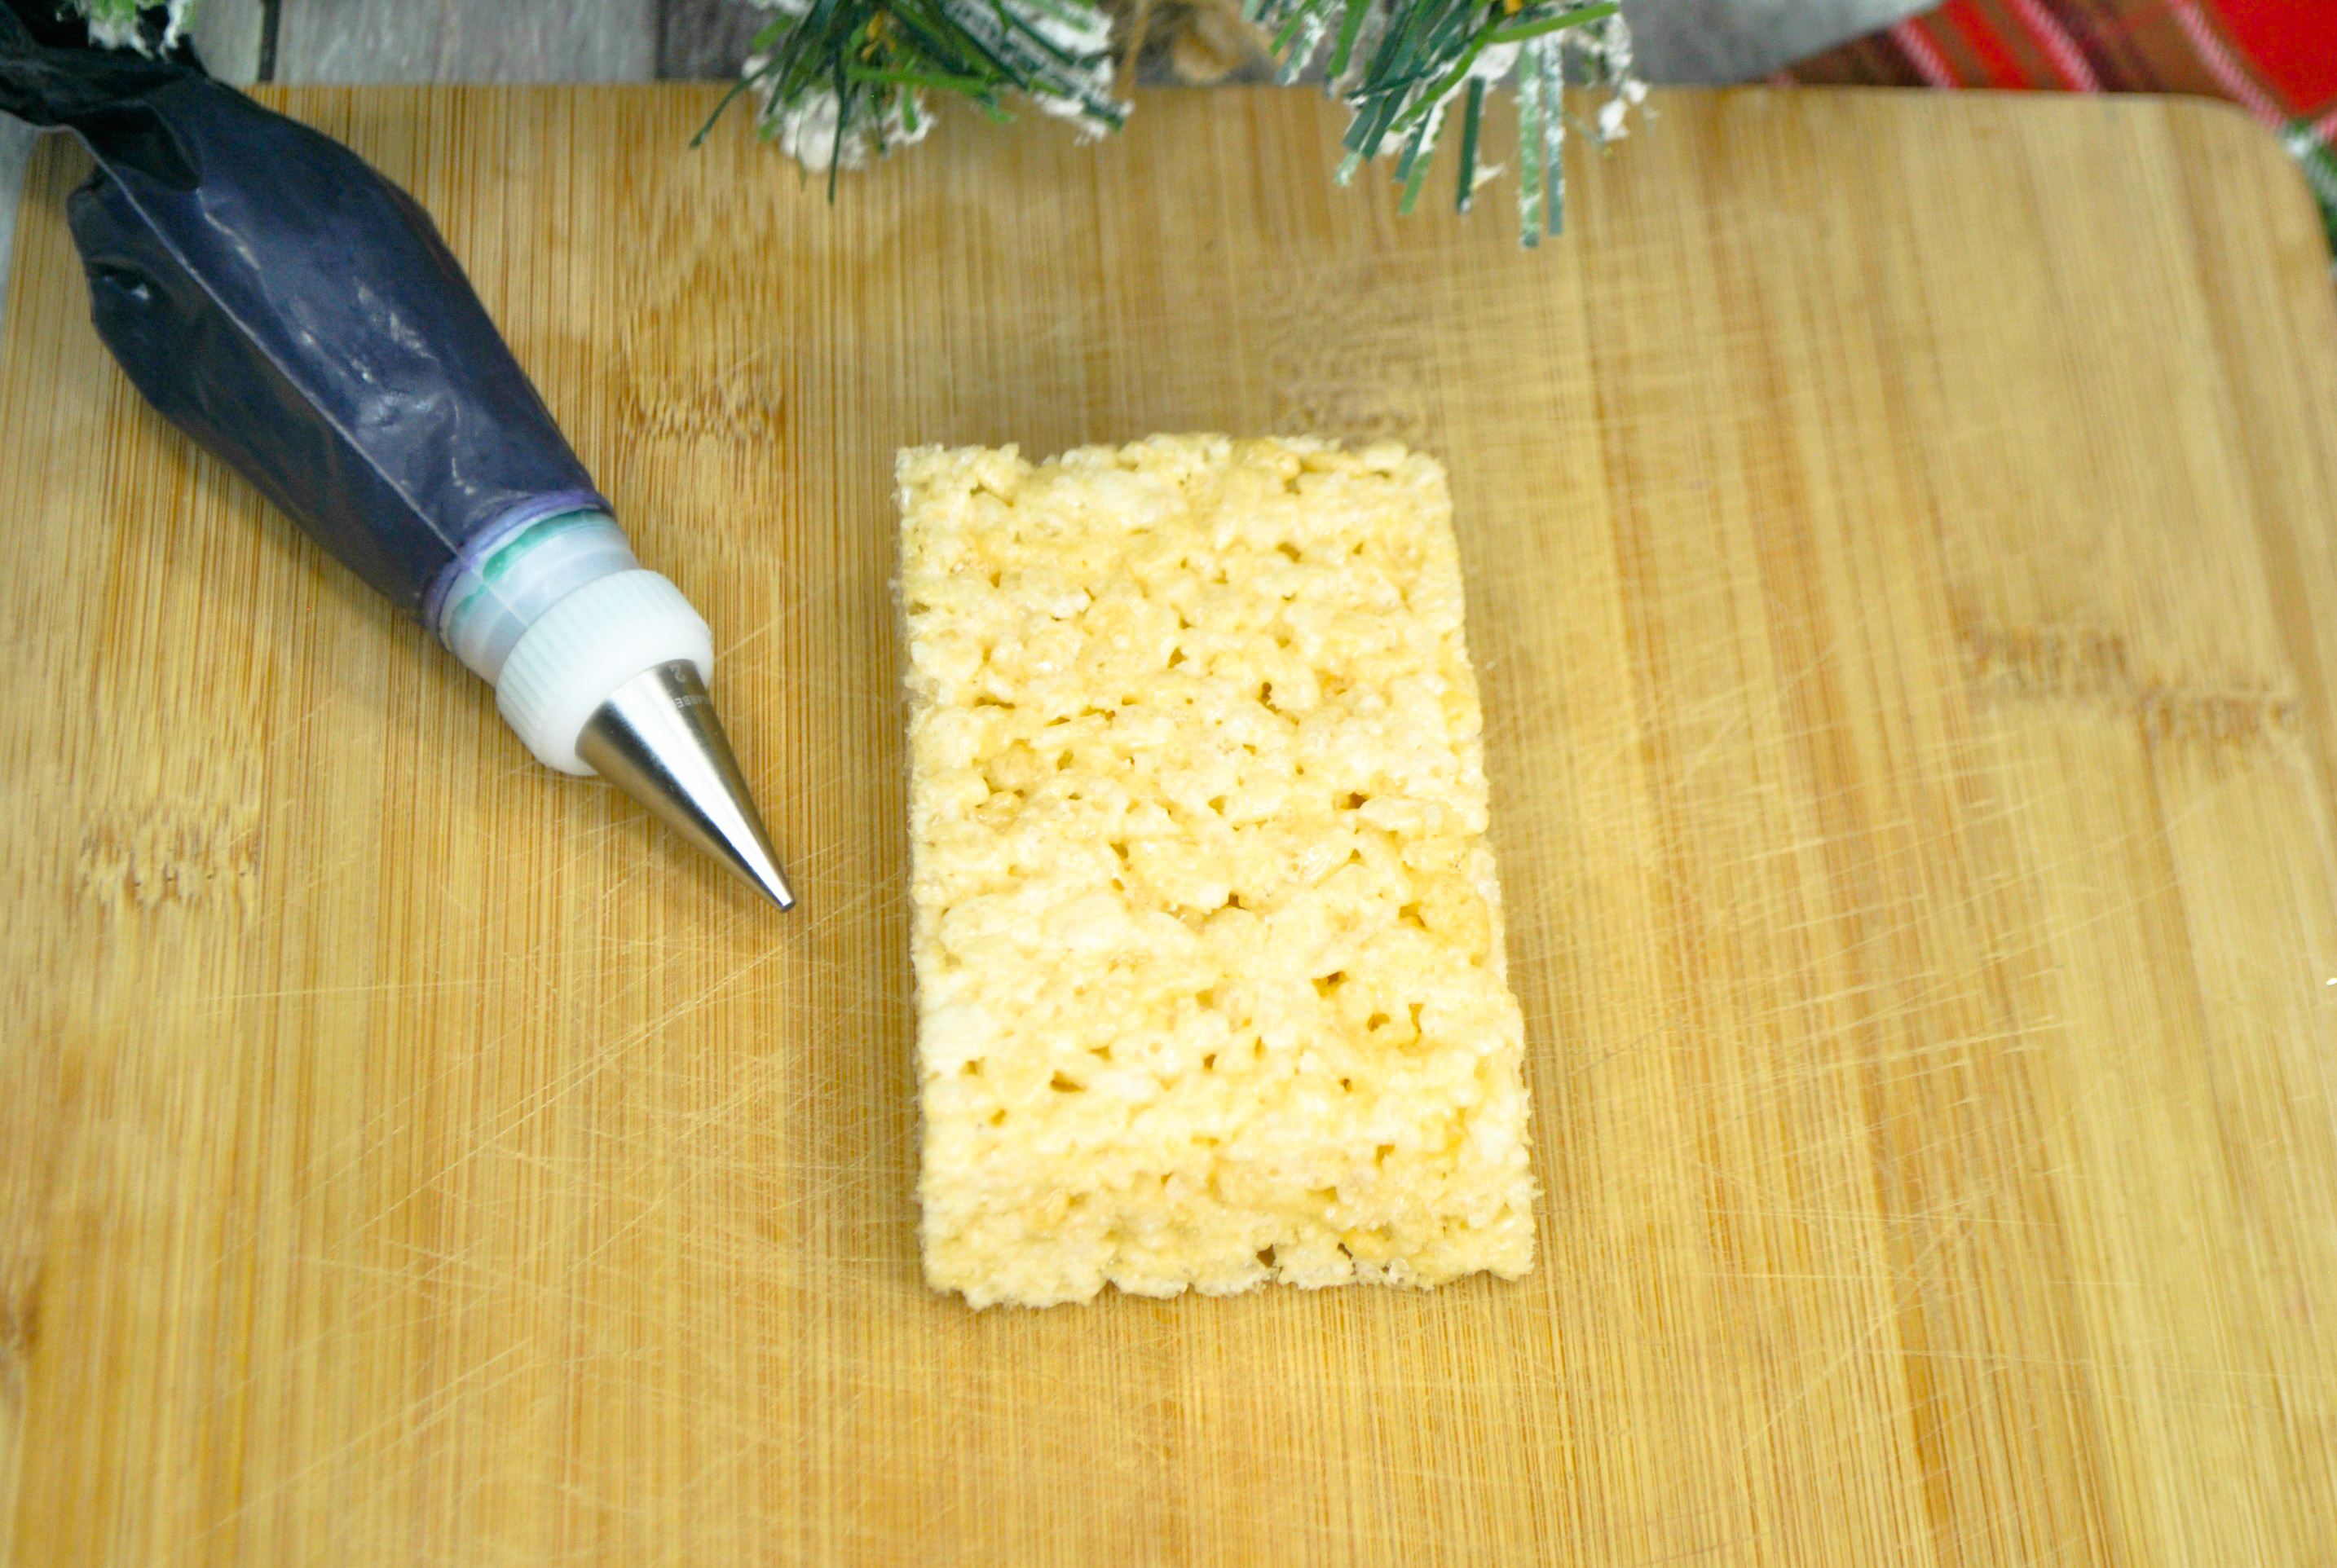 The cutest Nutcracker Soldier Rice Krispie Treat Recipe & Coloring Pages. This is such an easy recipe using store bought rice krispie treats. Great way to make a quick dessert and have fun at the same time! Enjoy the coloring pages and games!